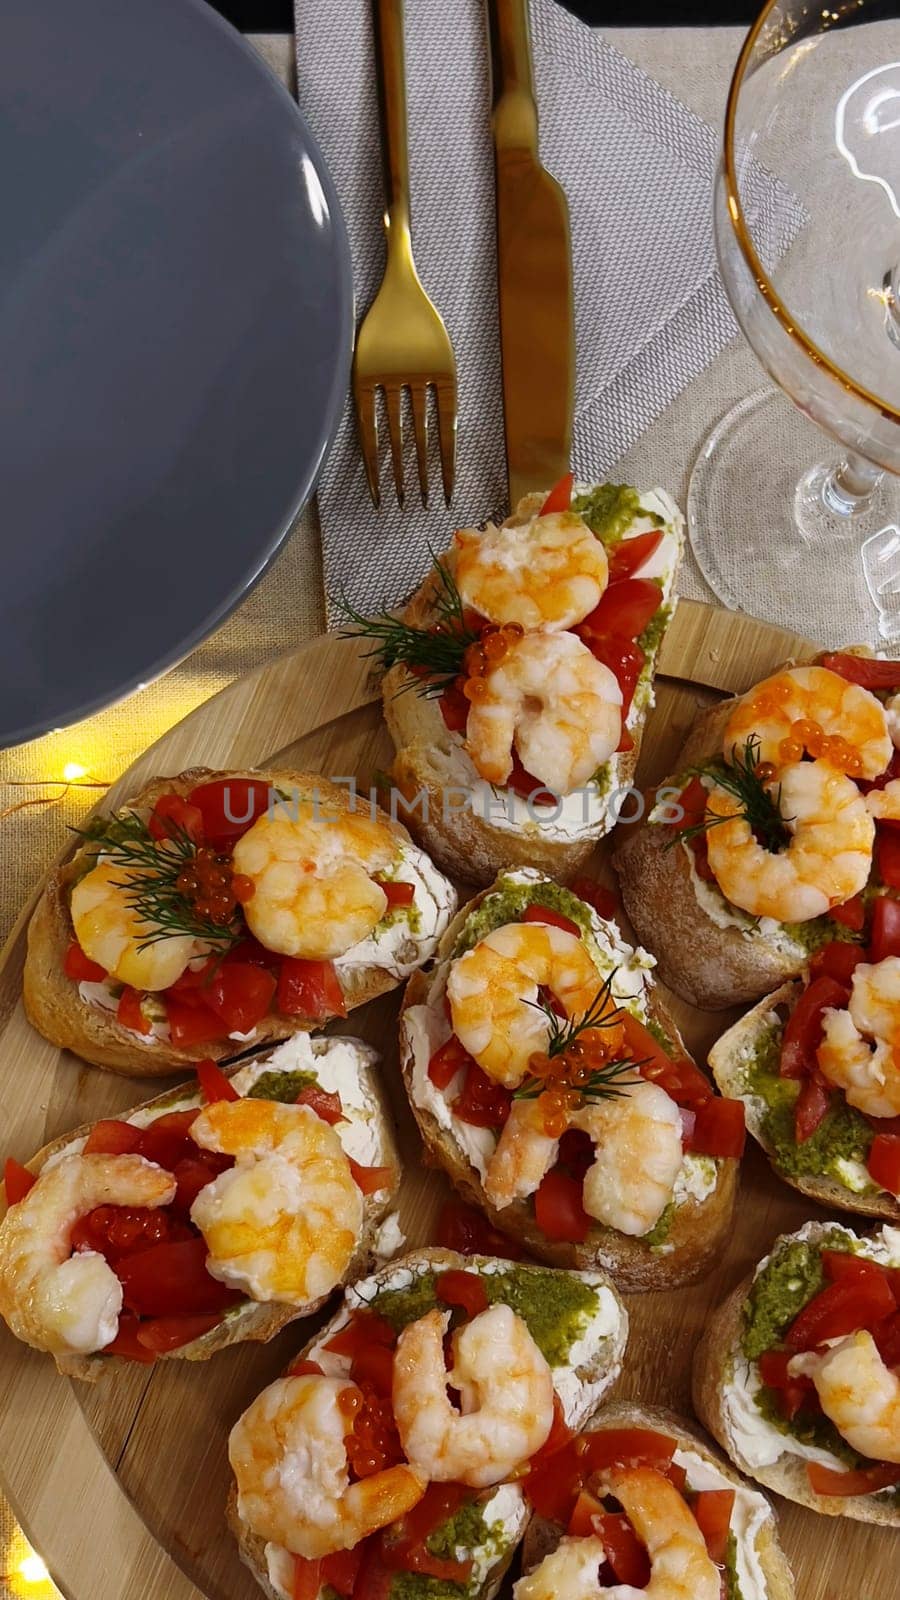 Festive candlelight dinner with shrimp and caviar sandwiches by MilaLazo